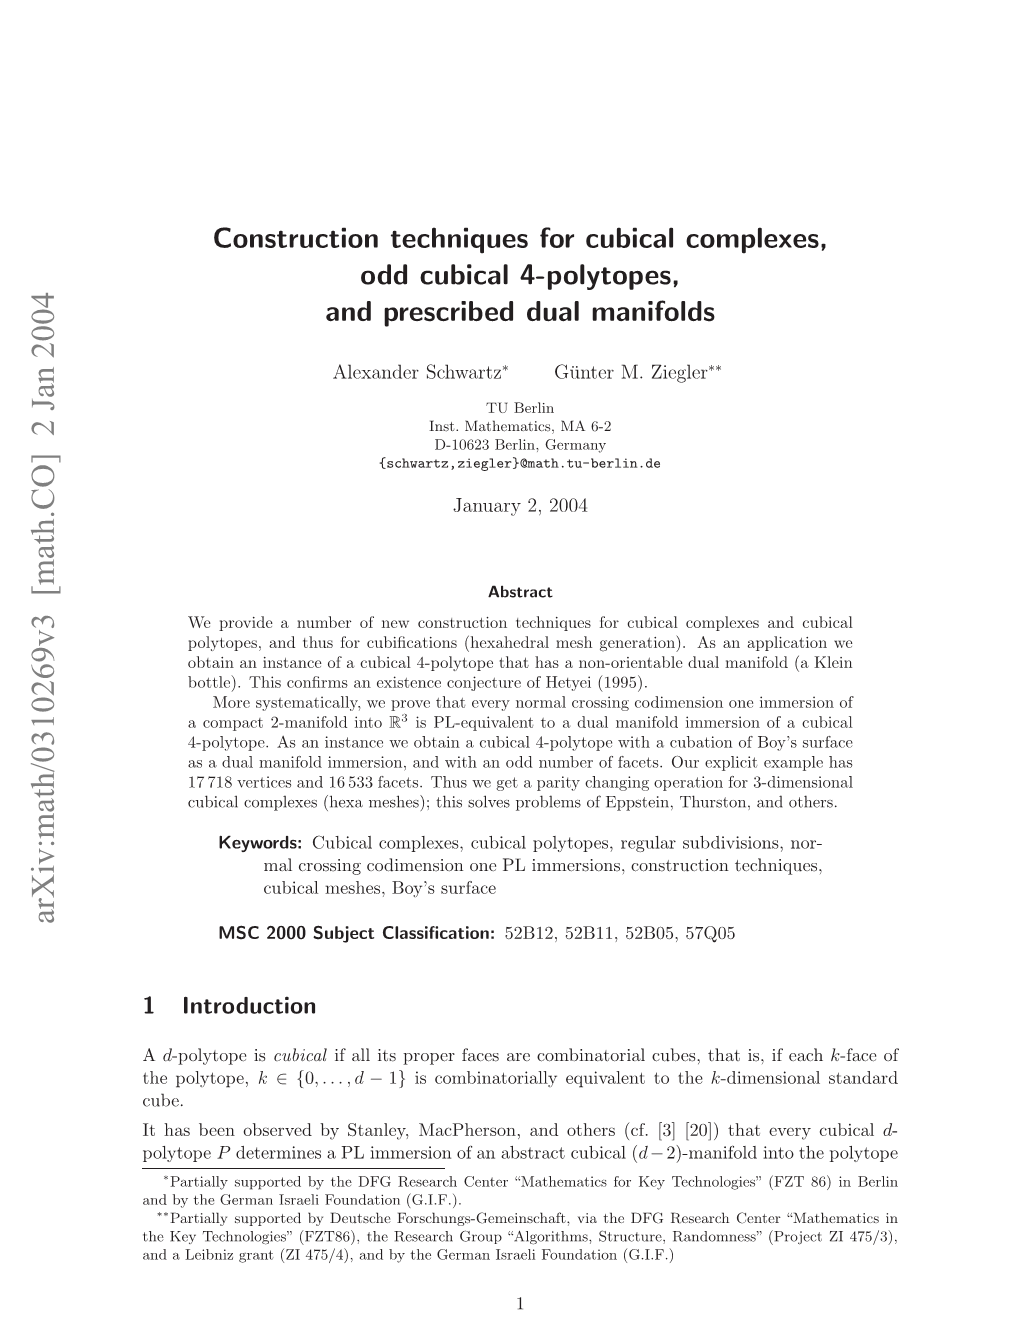 Construction Techniques for Cubical Complexes, Odd Cubical 4-Polytopes